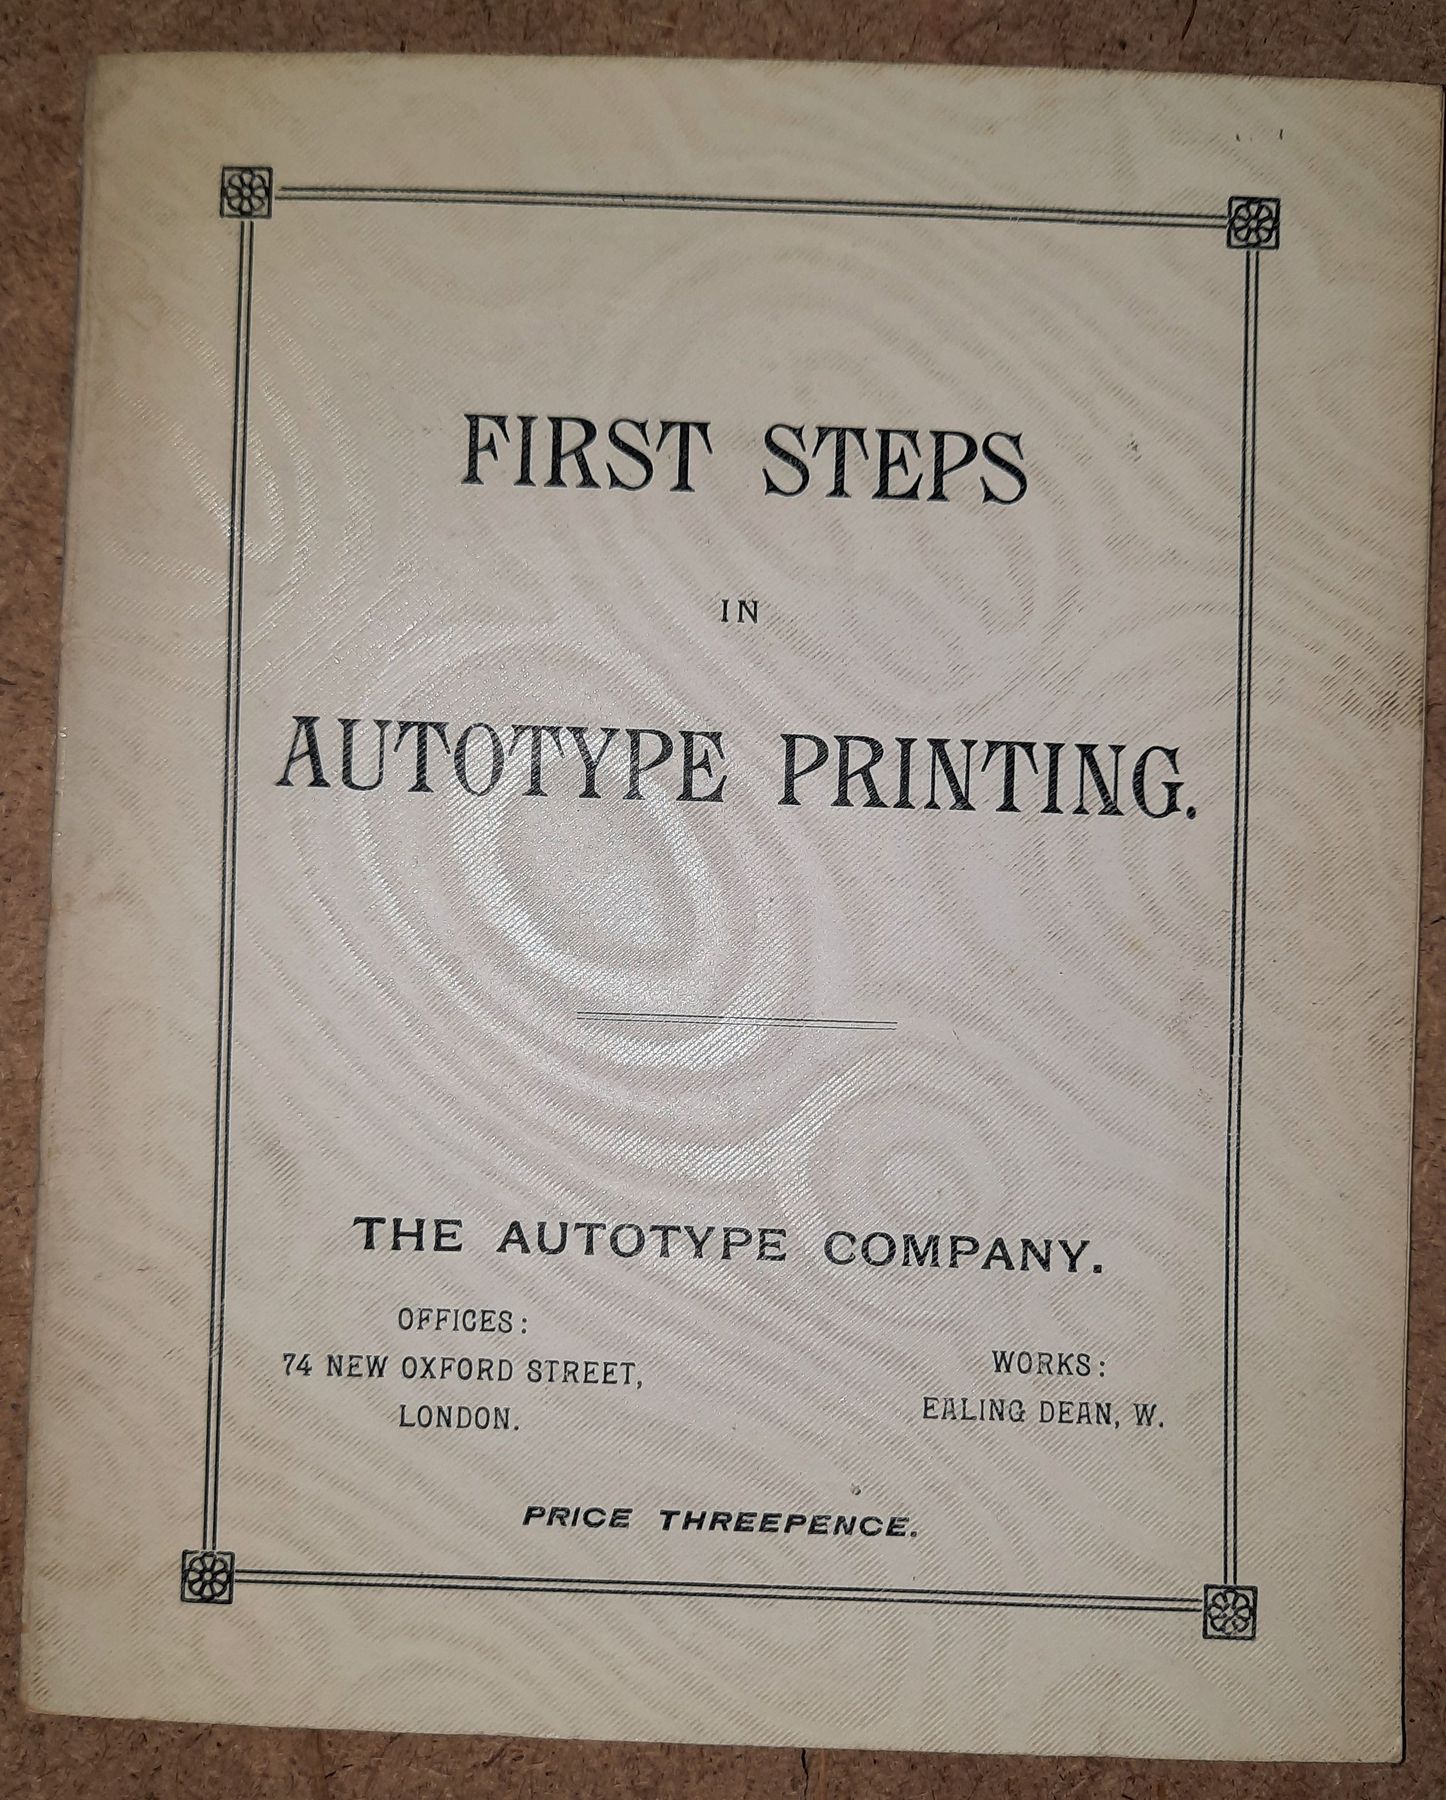  - First Steps in Autotype Printing..